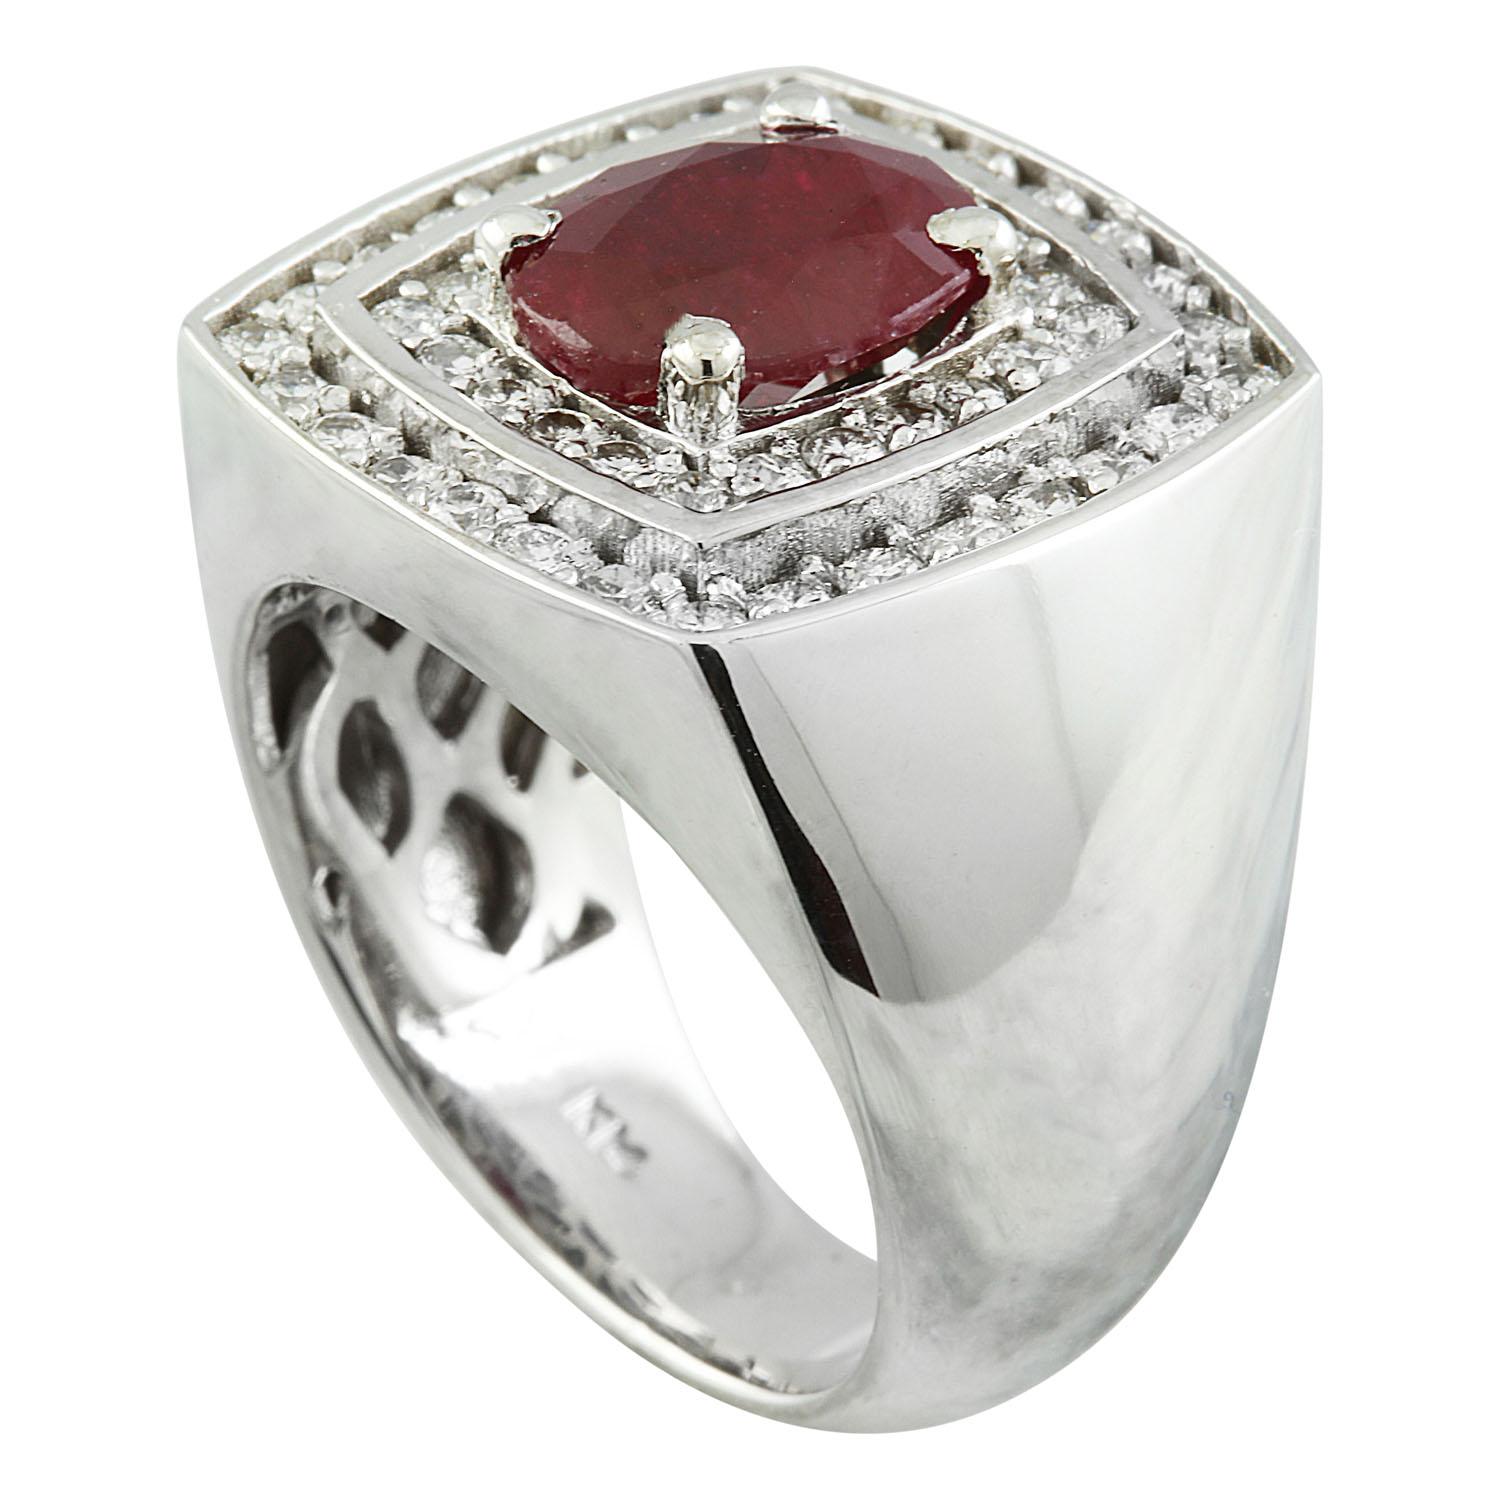 4.30 Carat Natural Ruby 14 Karat Solid White Gold Diamond Ring
Stamped: 14K 
Total Ring Weight: 18 Grams
Ruby Weight 3.20 Carat (10.00x8.00 Millimeters)
Diamond Weight: 1.10 carat (F-G Color, VS2-SI1 Clarity )
Face Measures: 19.00x19.20  Millimeter